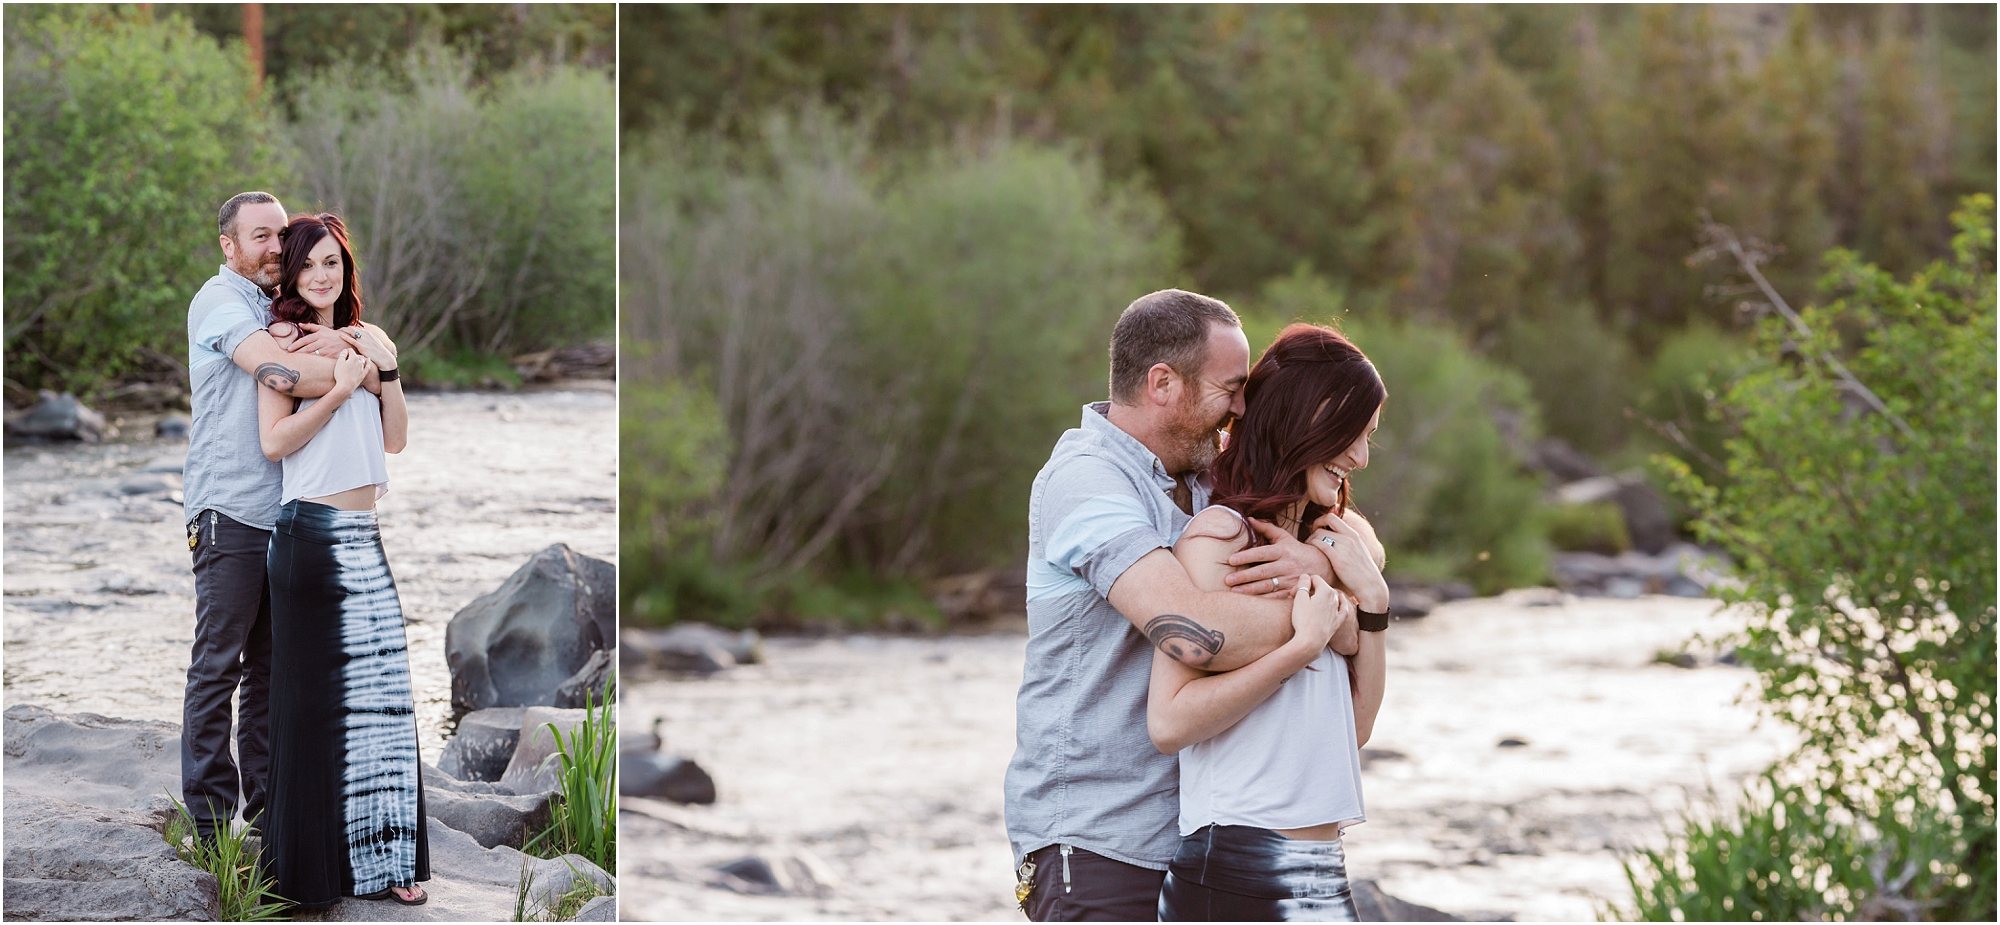 An outdoor adventure engagement session along the Deschutes River in Bend, OR. | Erica Swantek Photography